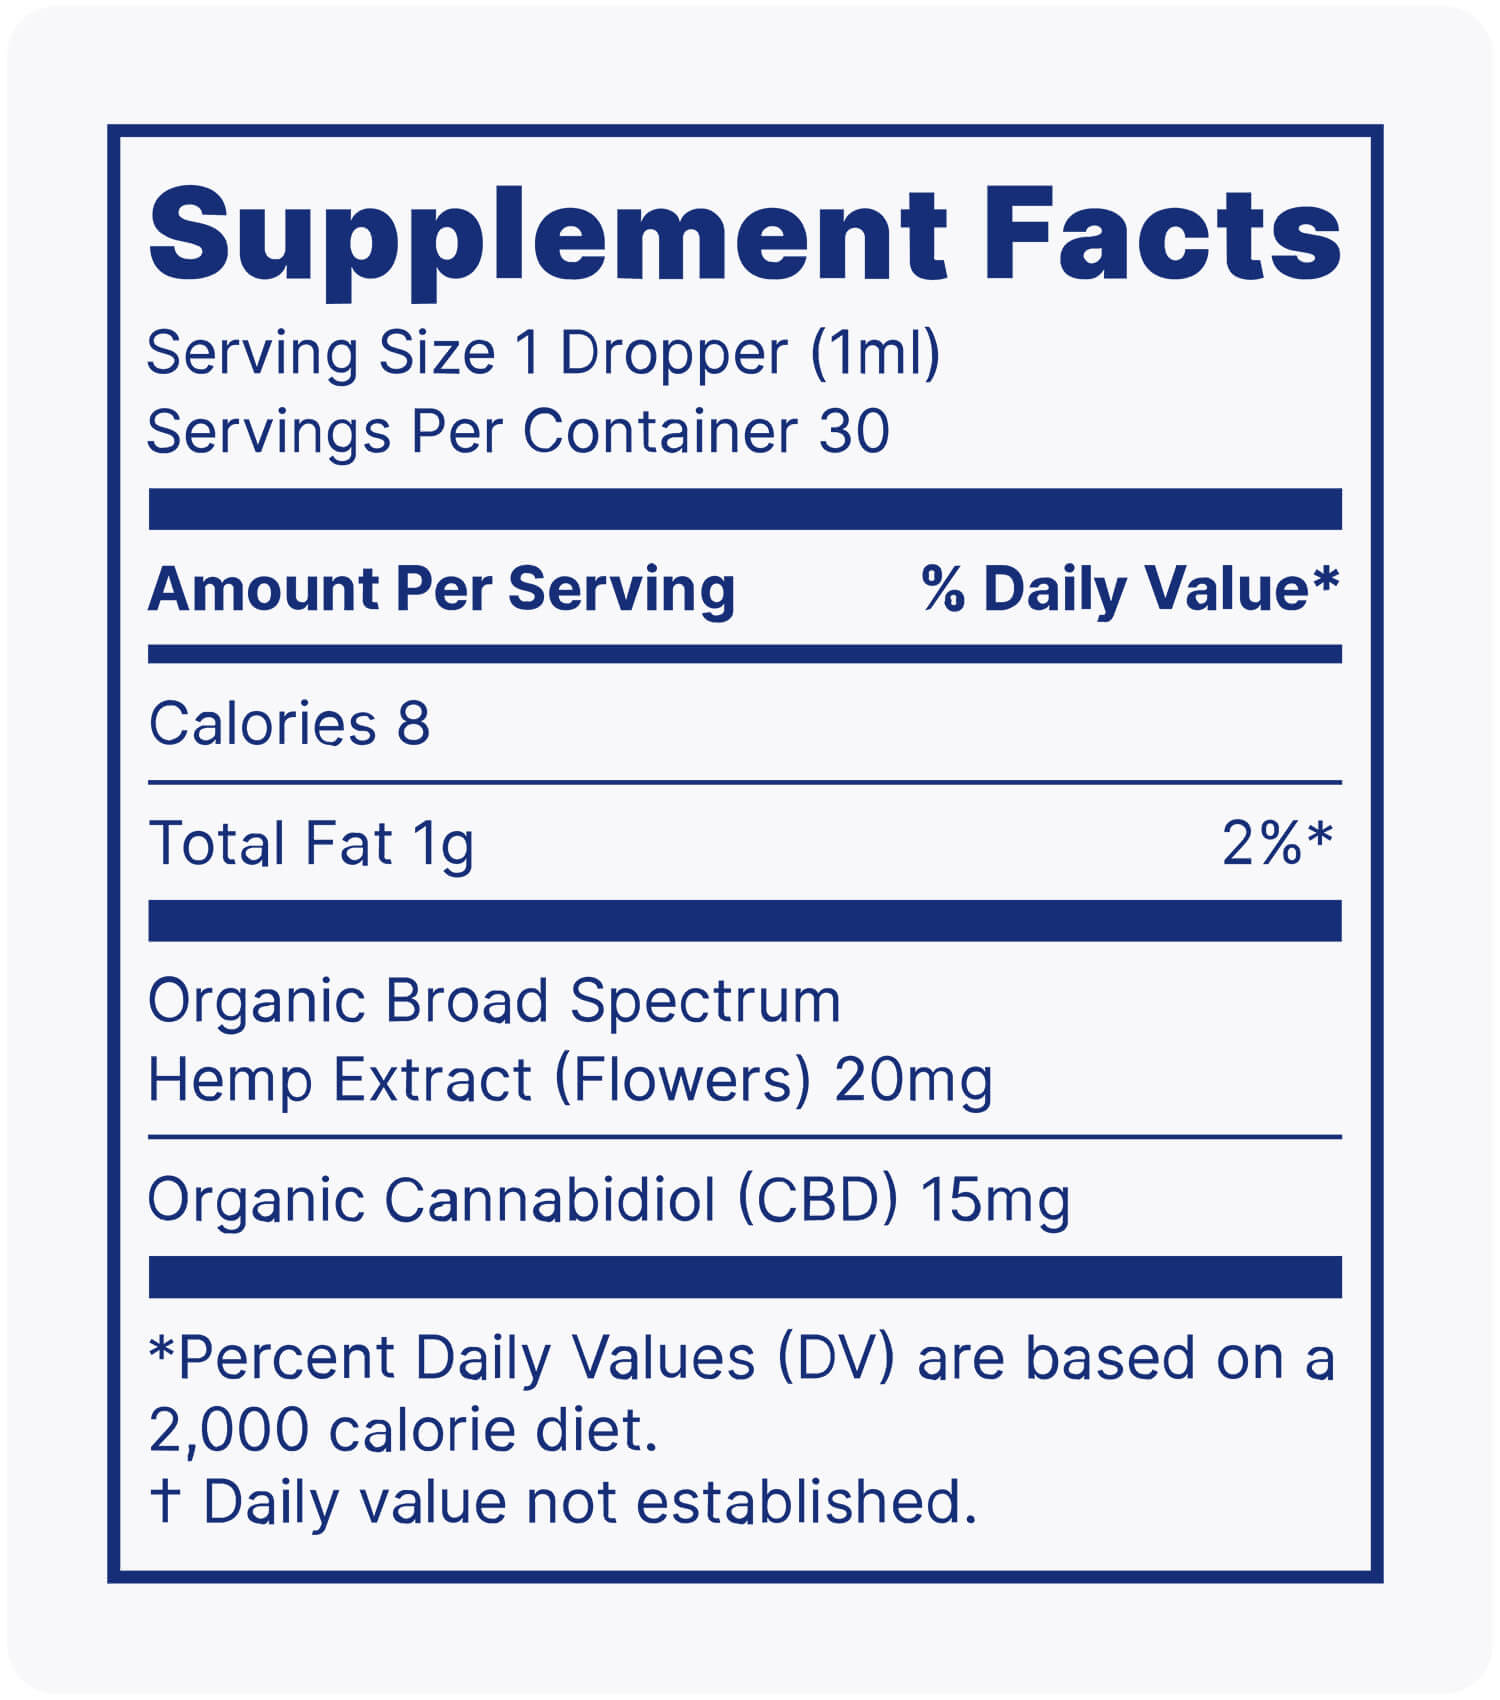 Pawsome-450-Supplement-Facts---blue-01---PNG.jpg__PID:8cf4df47-2990-4020-96a3-01c4ffe86e9c